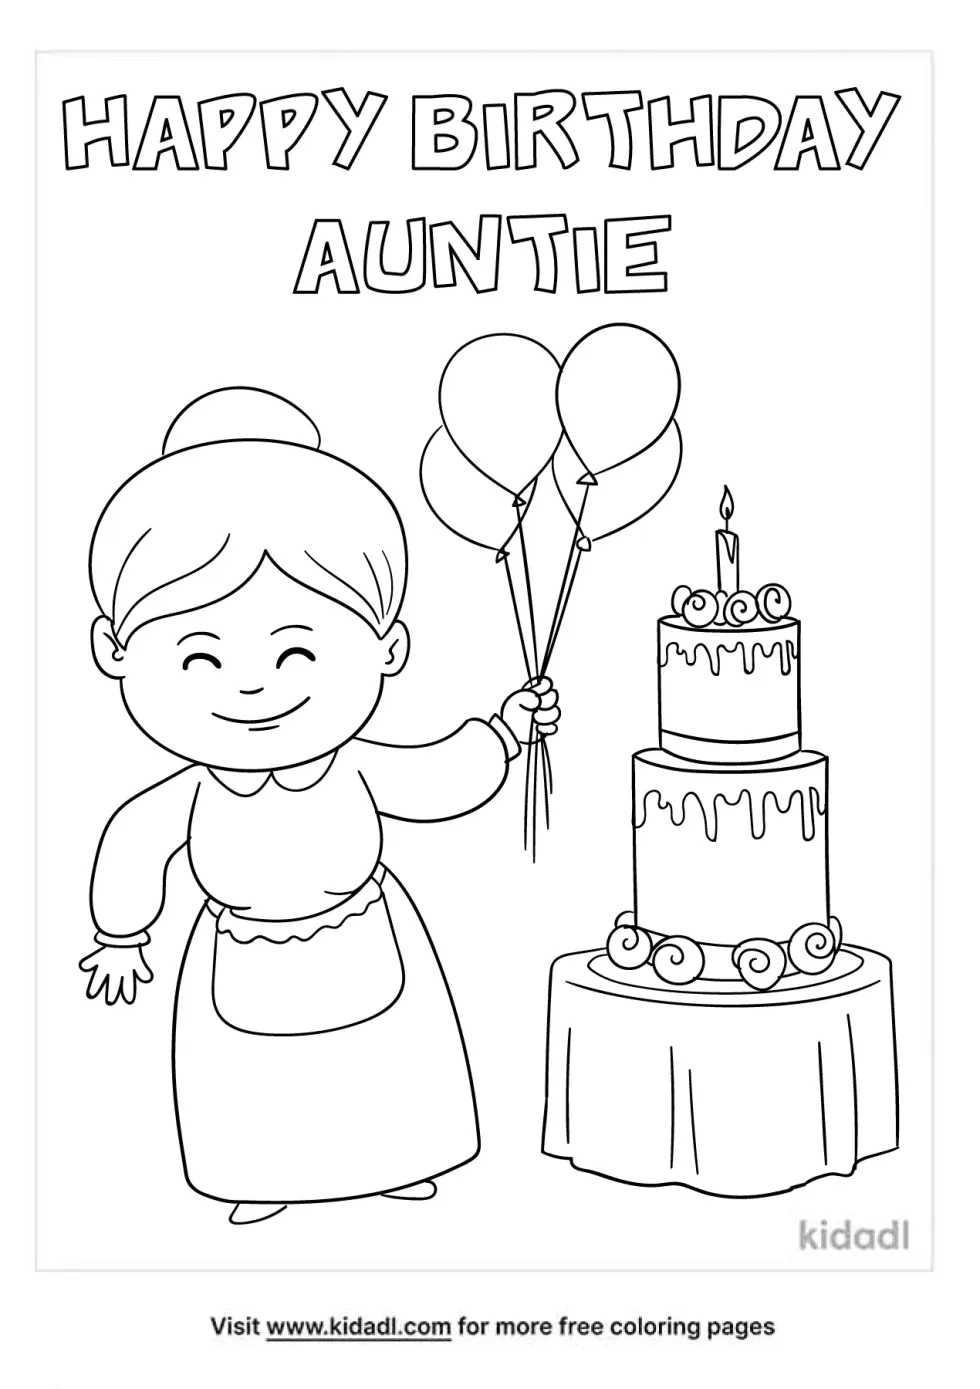 Happy Birthday Auntie Coloring Page